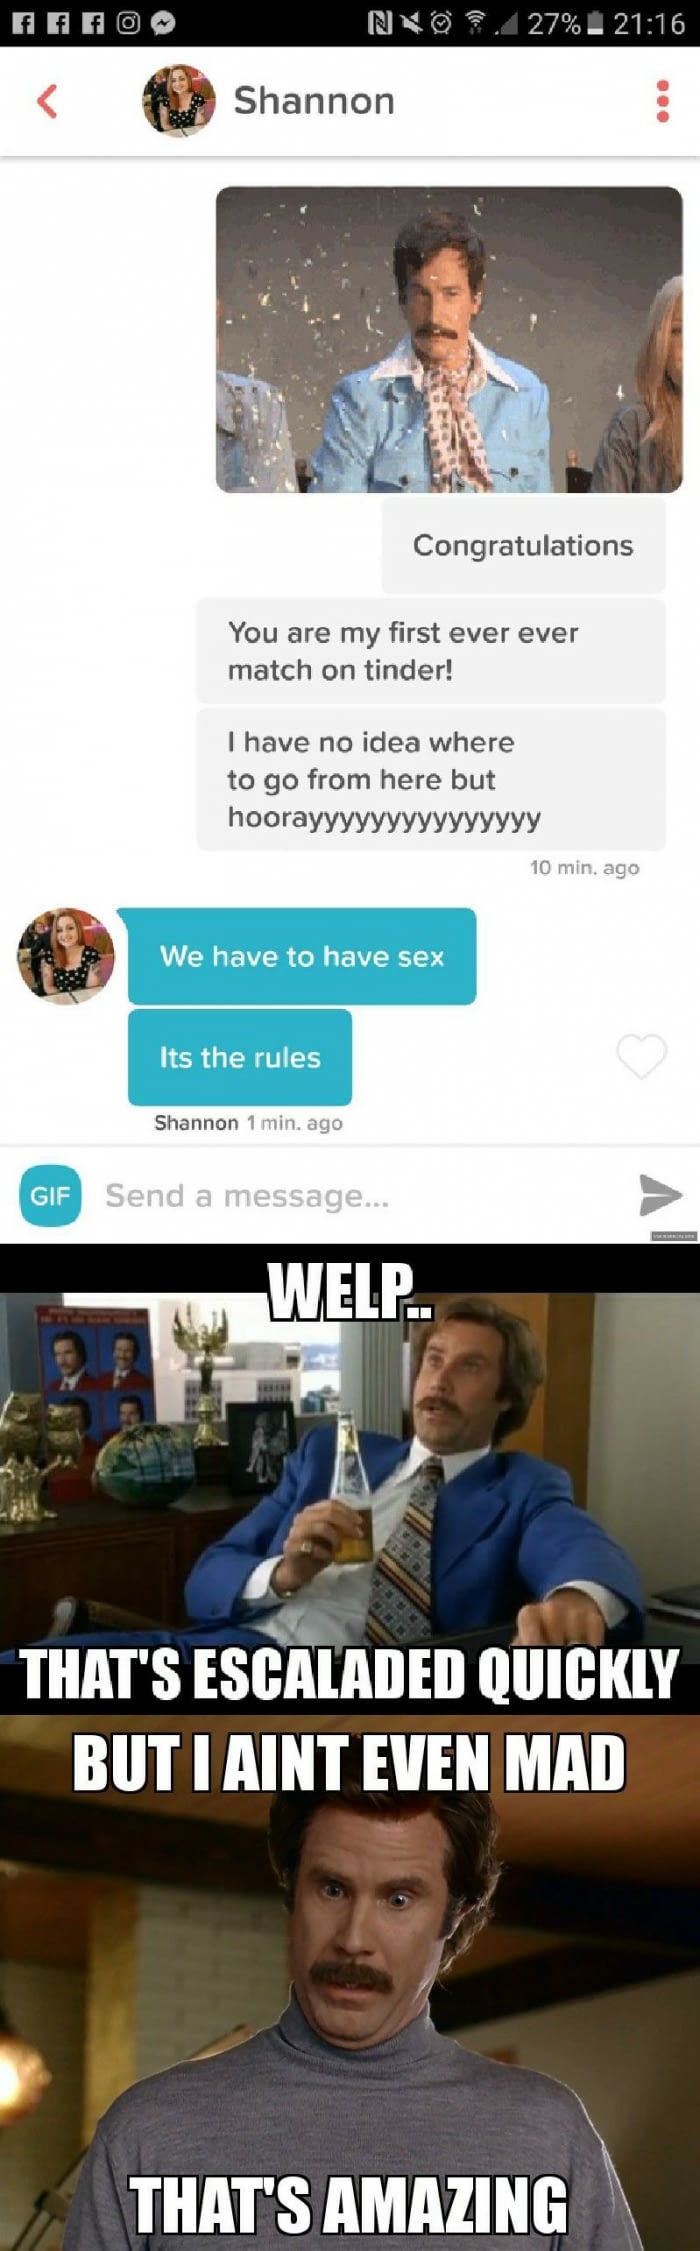 shannon tinder - ' N O . 27%. Shannon Congratulations You are my first ever ever match on tinder! I have no idea where to go from here but hoorayyyyyyyyyyyyyyy 10 min, ago We have to have sex Its the rules Shannon 1 min. ago Gif Send a message... Welp Tha